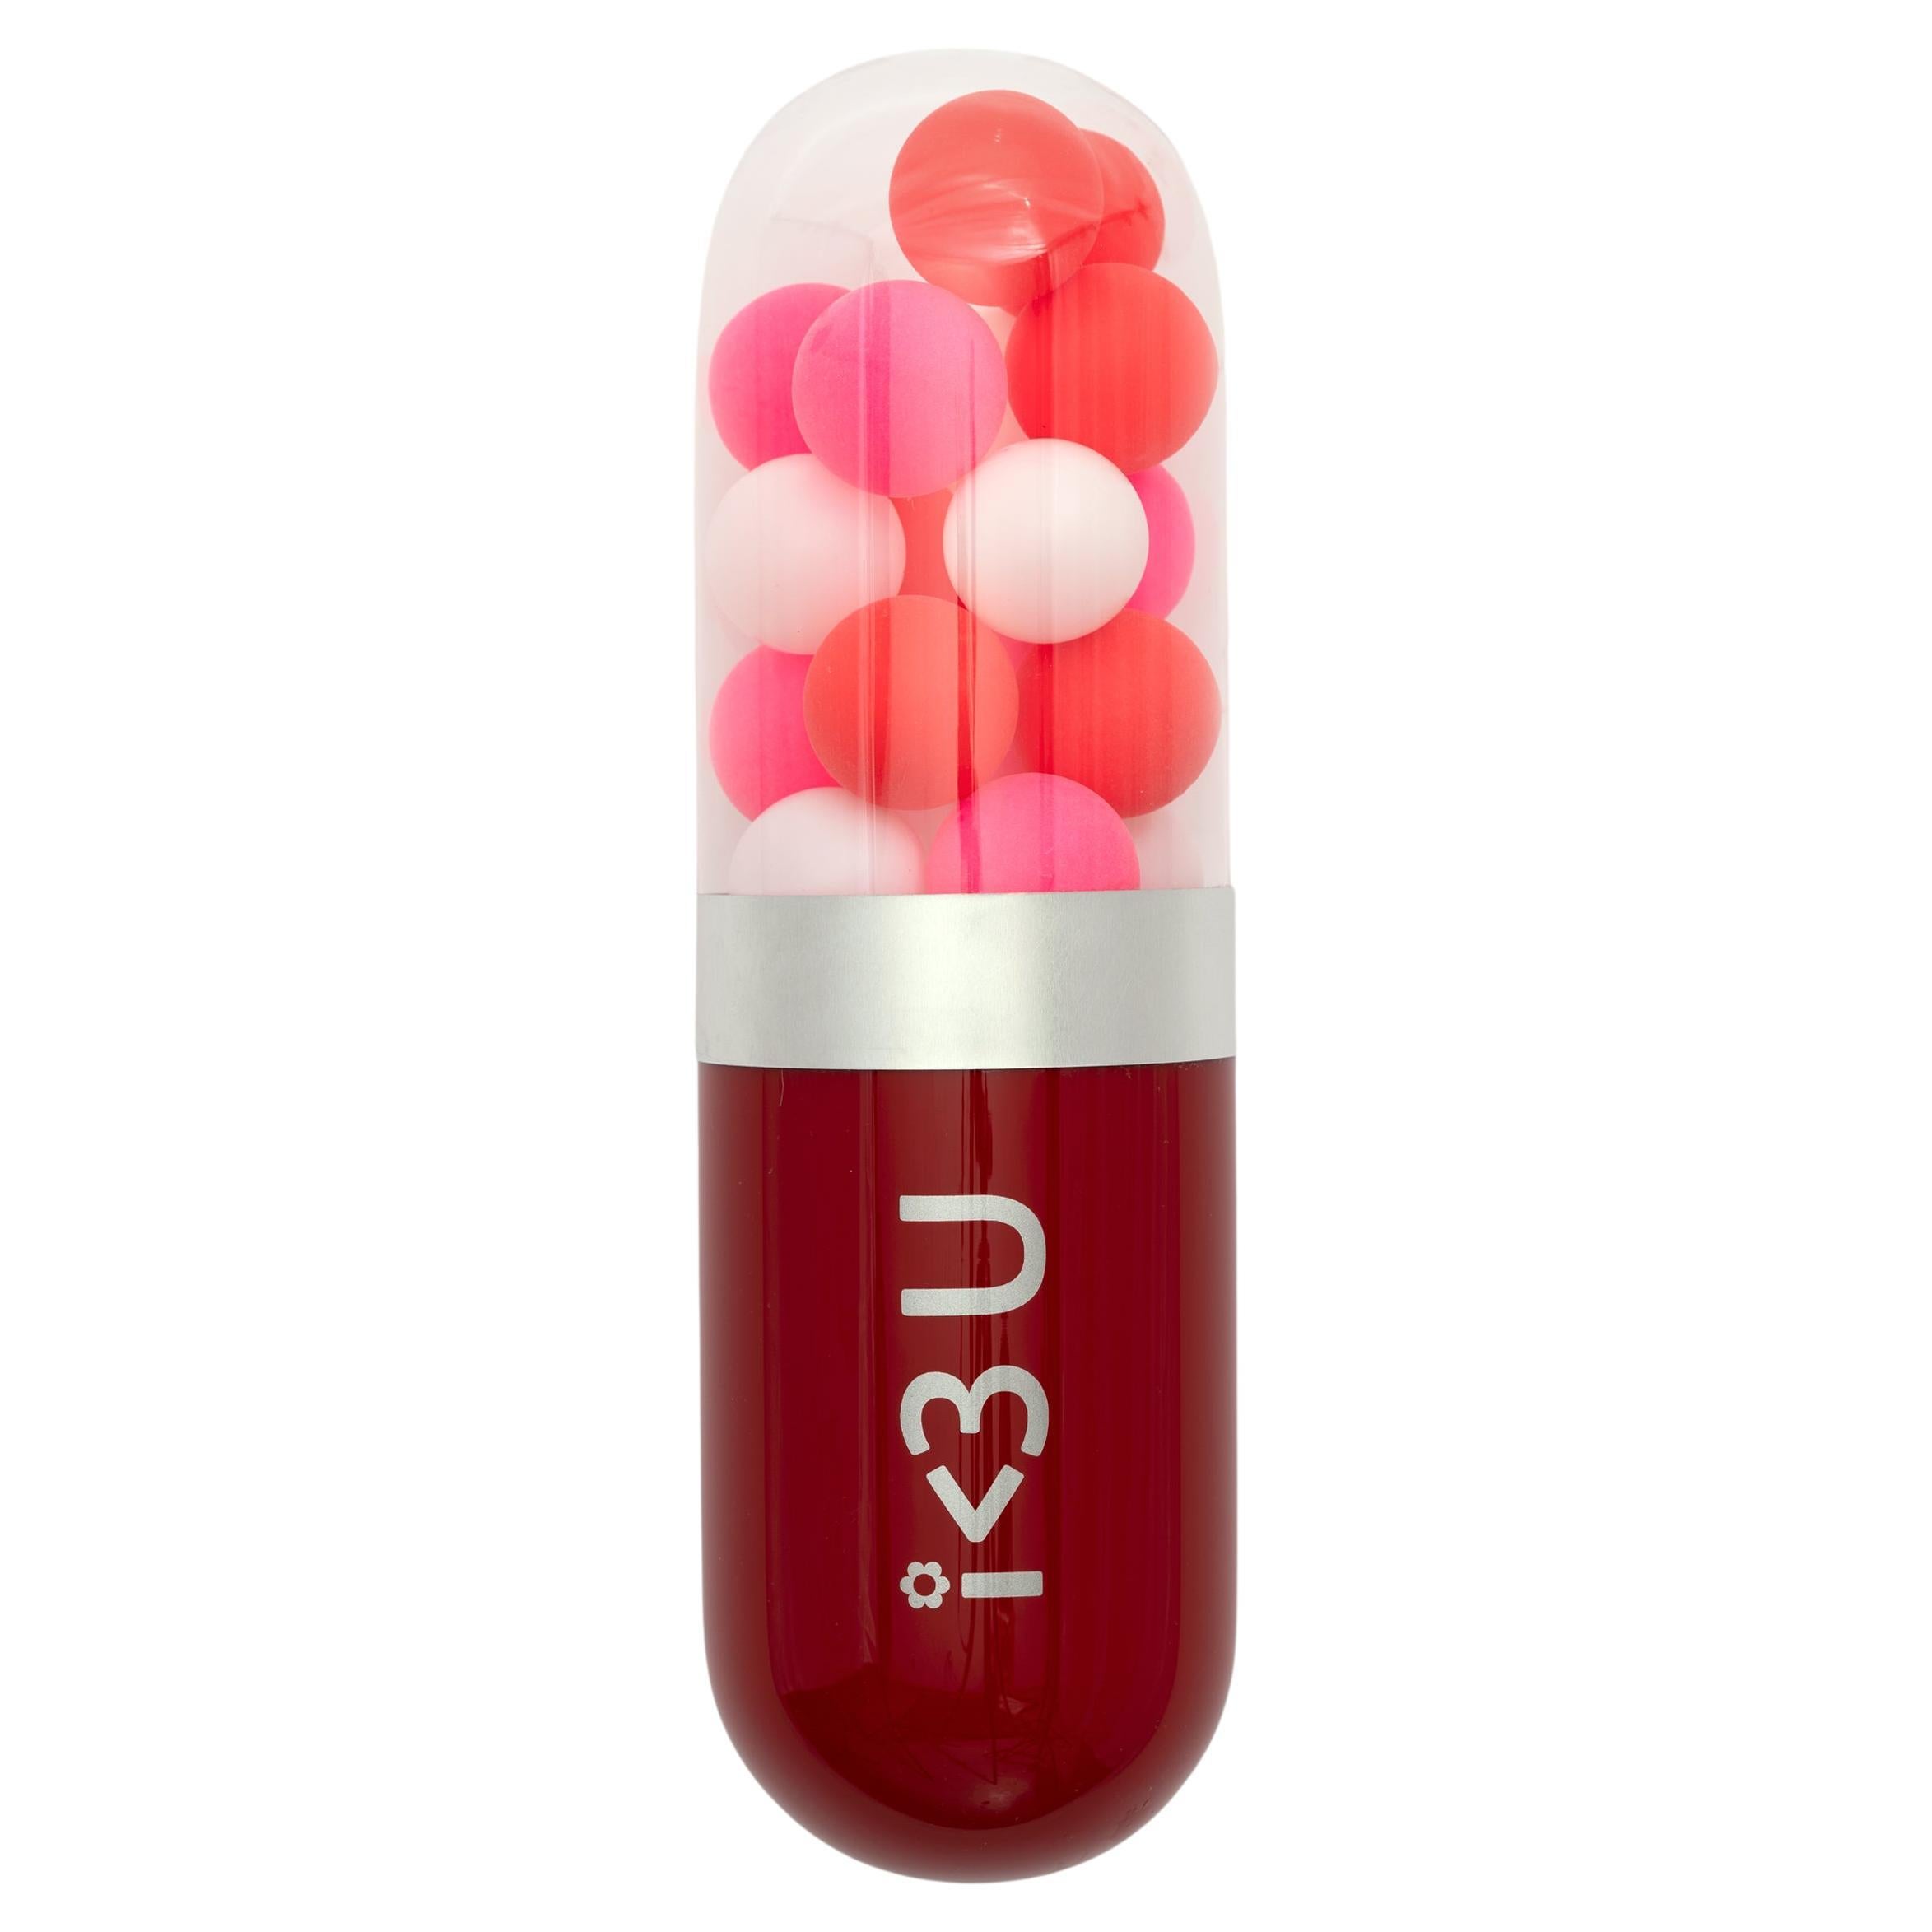 I <3 U (I Love You) - Red glass pill wall sculpture For Sale